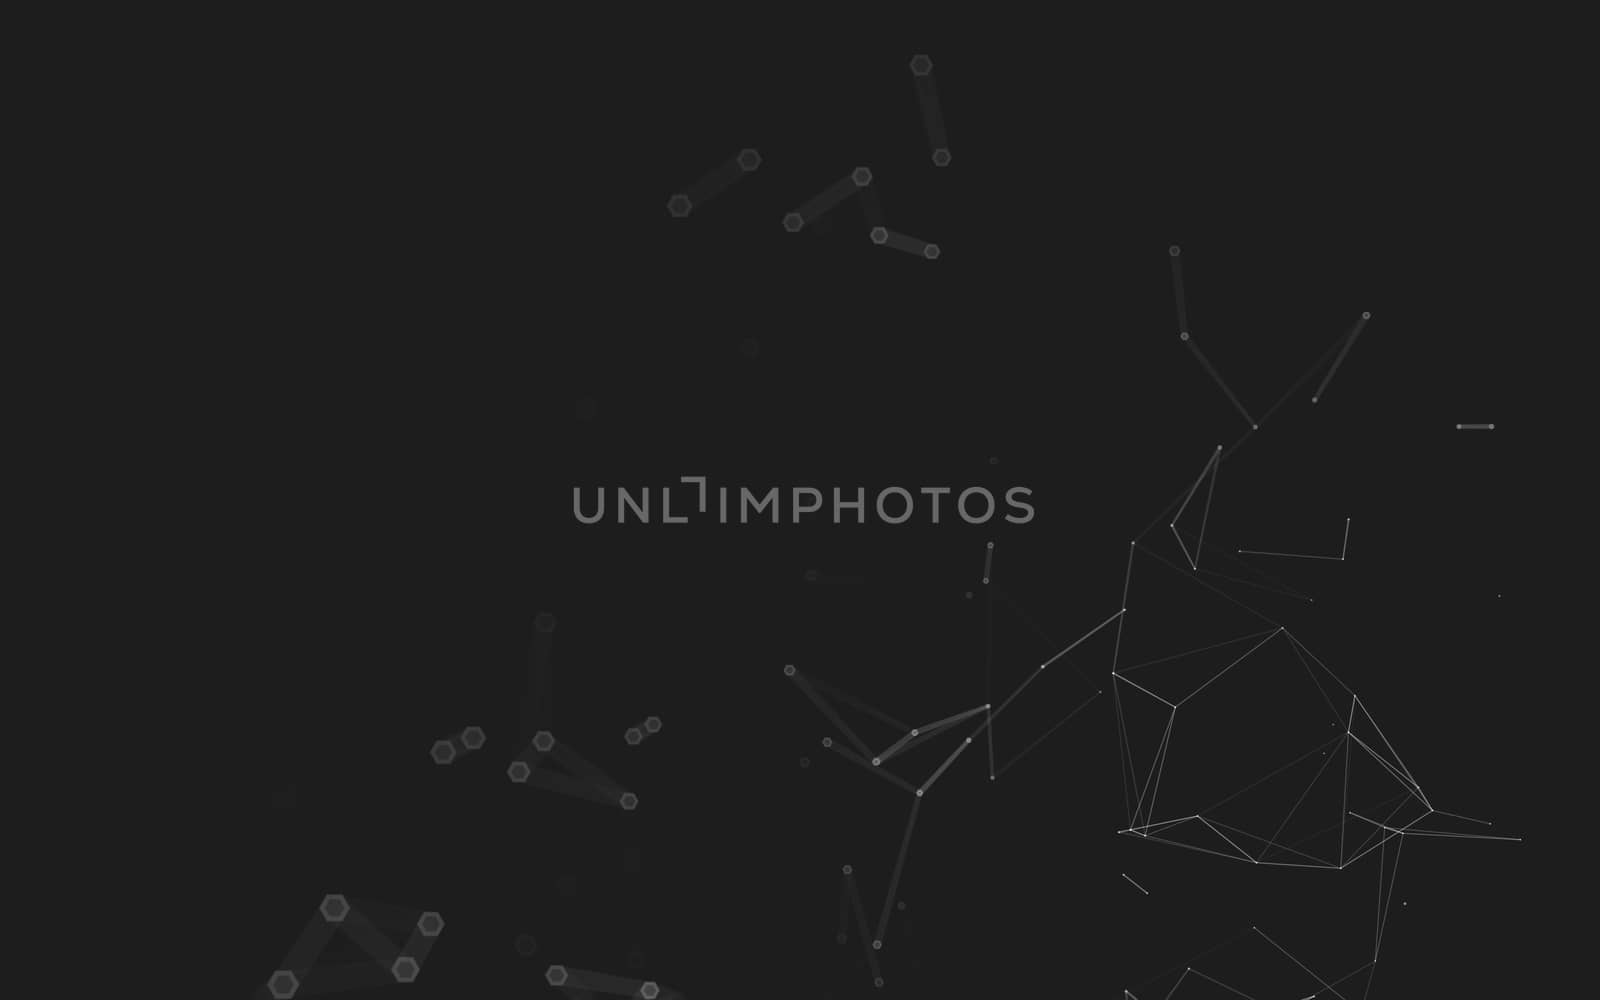 Abstract polygonal space low poly dark background with connecting dots and lines. Connection structure. 3d rendering